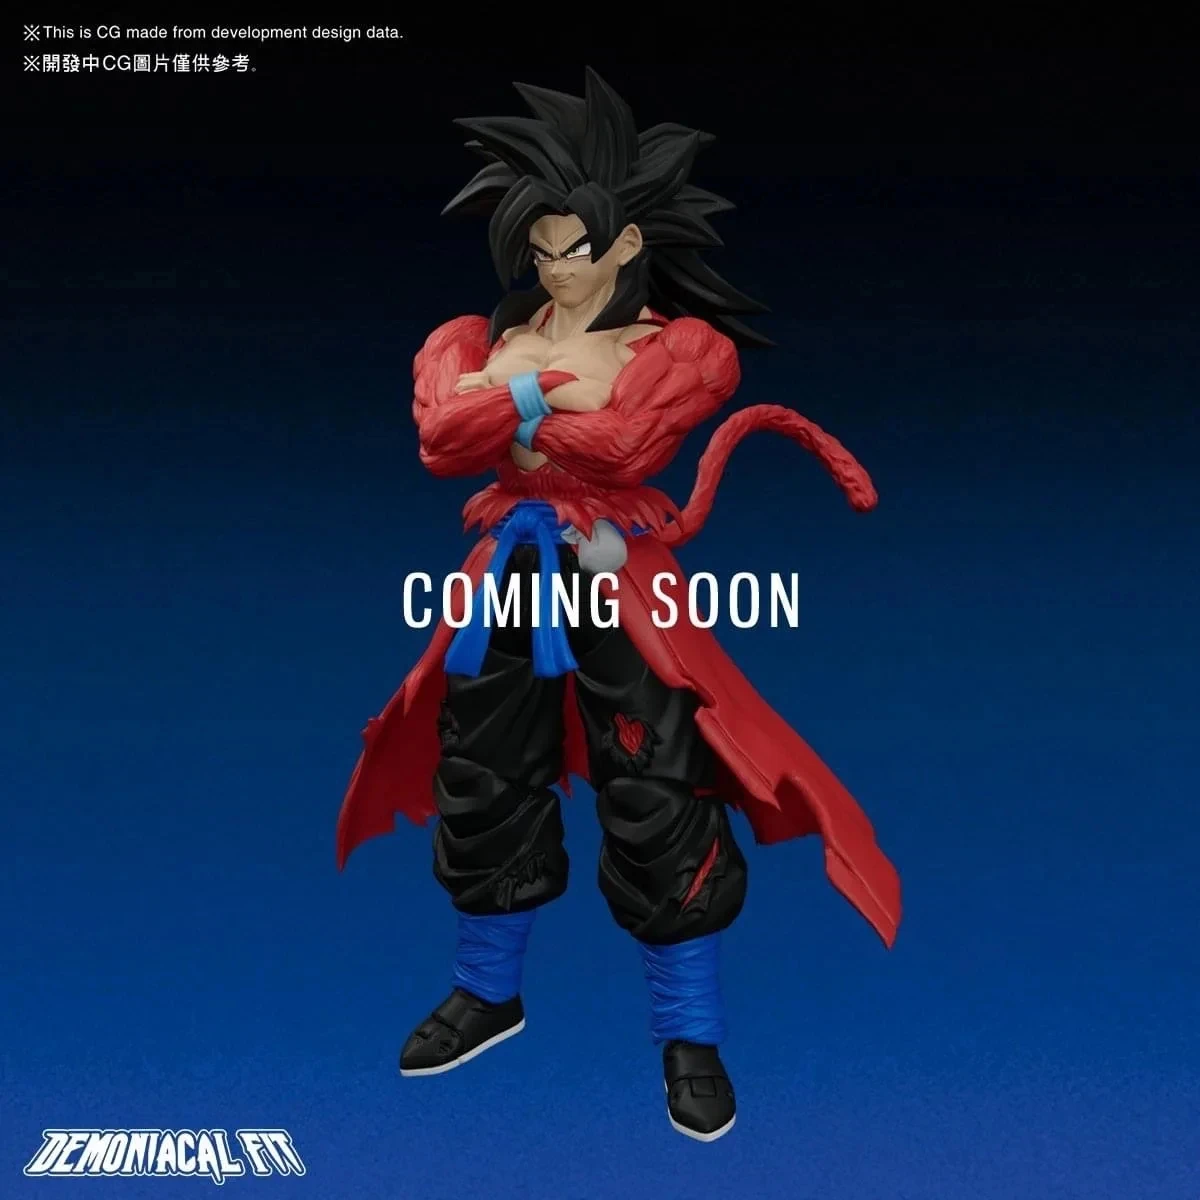 https://ae01.alicdn.com/kf/S08bee438e15b4cf1aa2f7147a4f932c2T/Restock-Demoniacal-Fit-Dragon-Ball-S-H-Figuarts-SHF-Martialist-Forever-Ultimate-Atrocious-Goku-Anime-Action.jpg